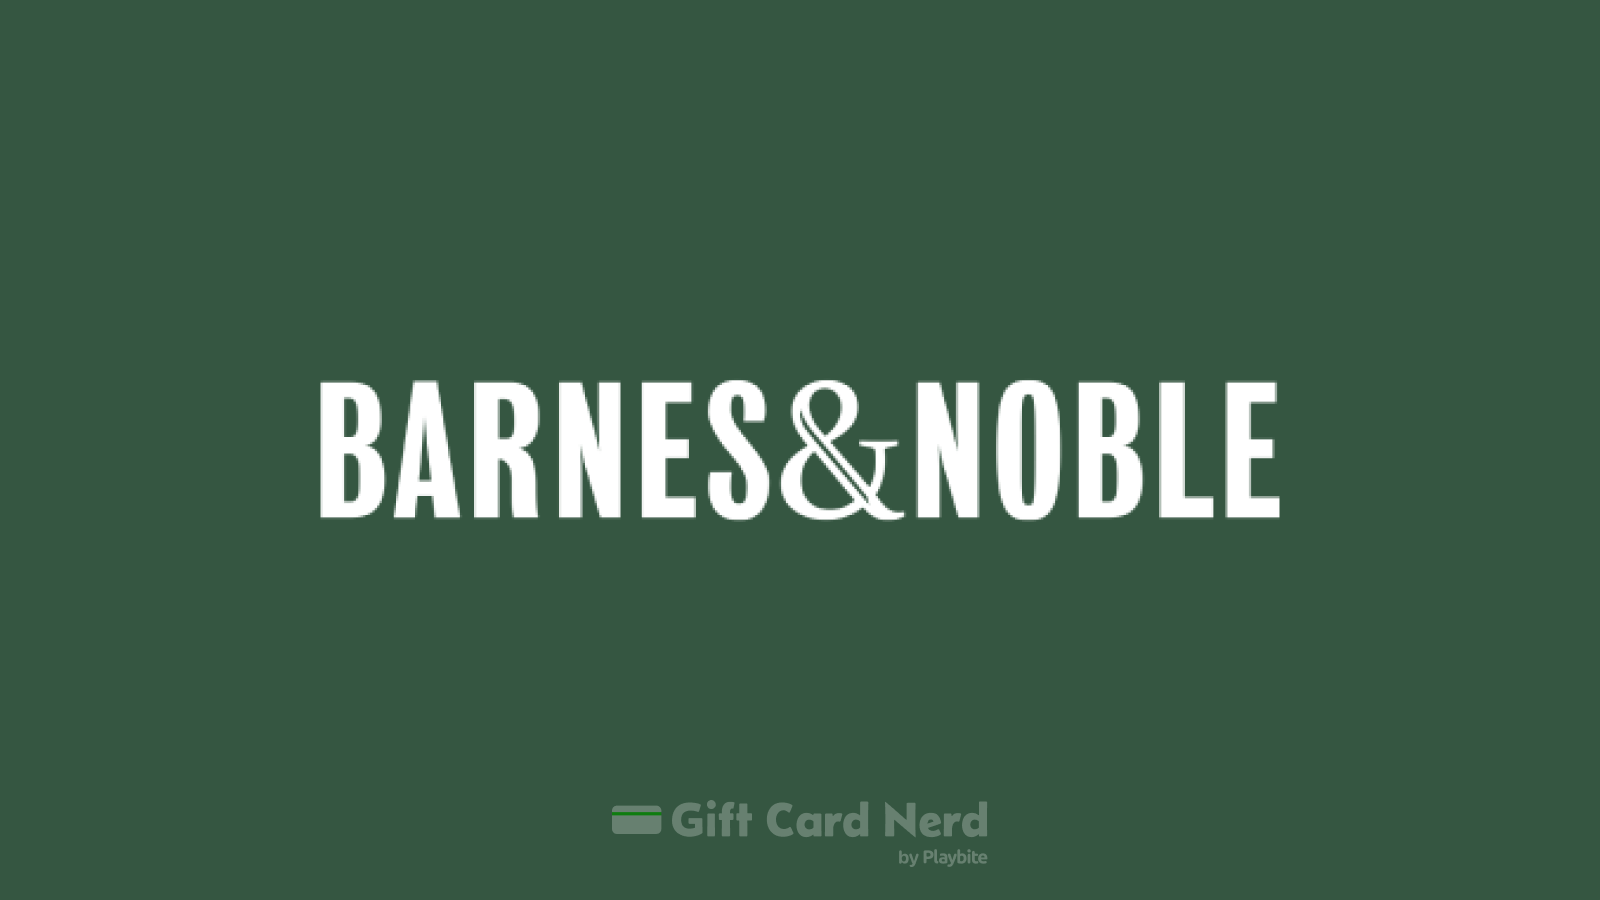 Can I Use a Barnes and Noble Gift Card on DoorDash?